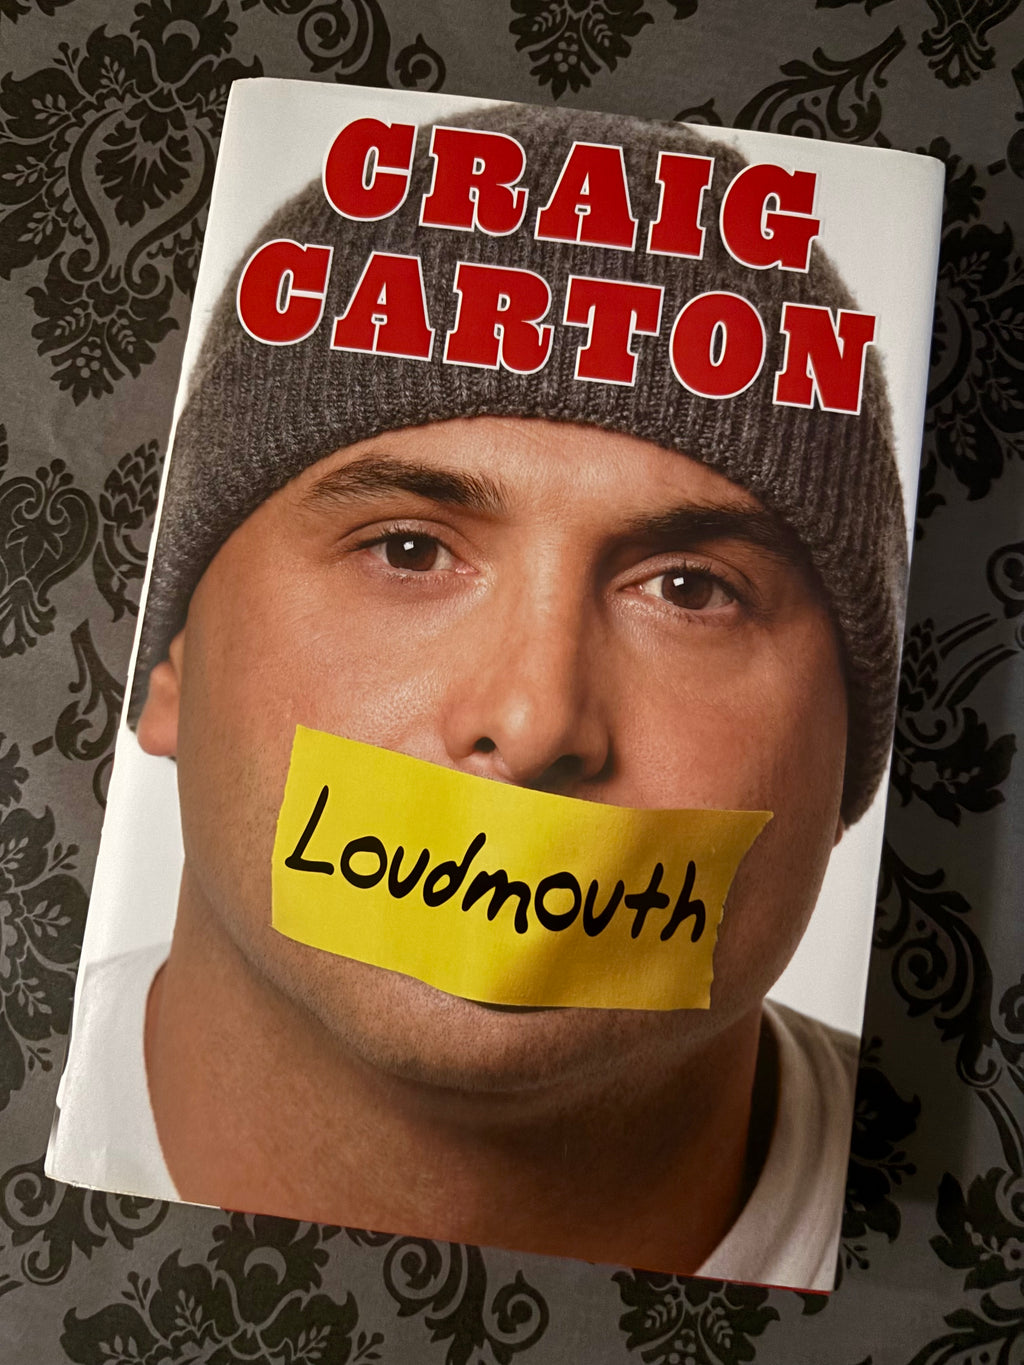 Loudmouth- By Craig Carton